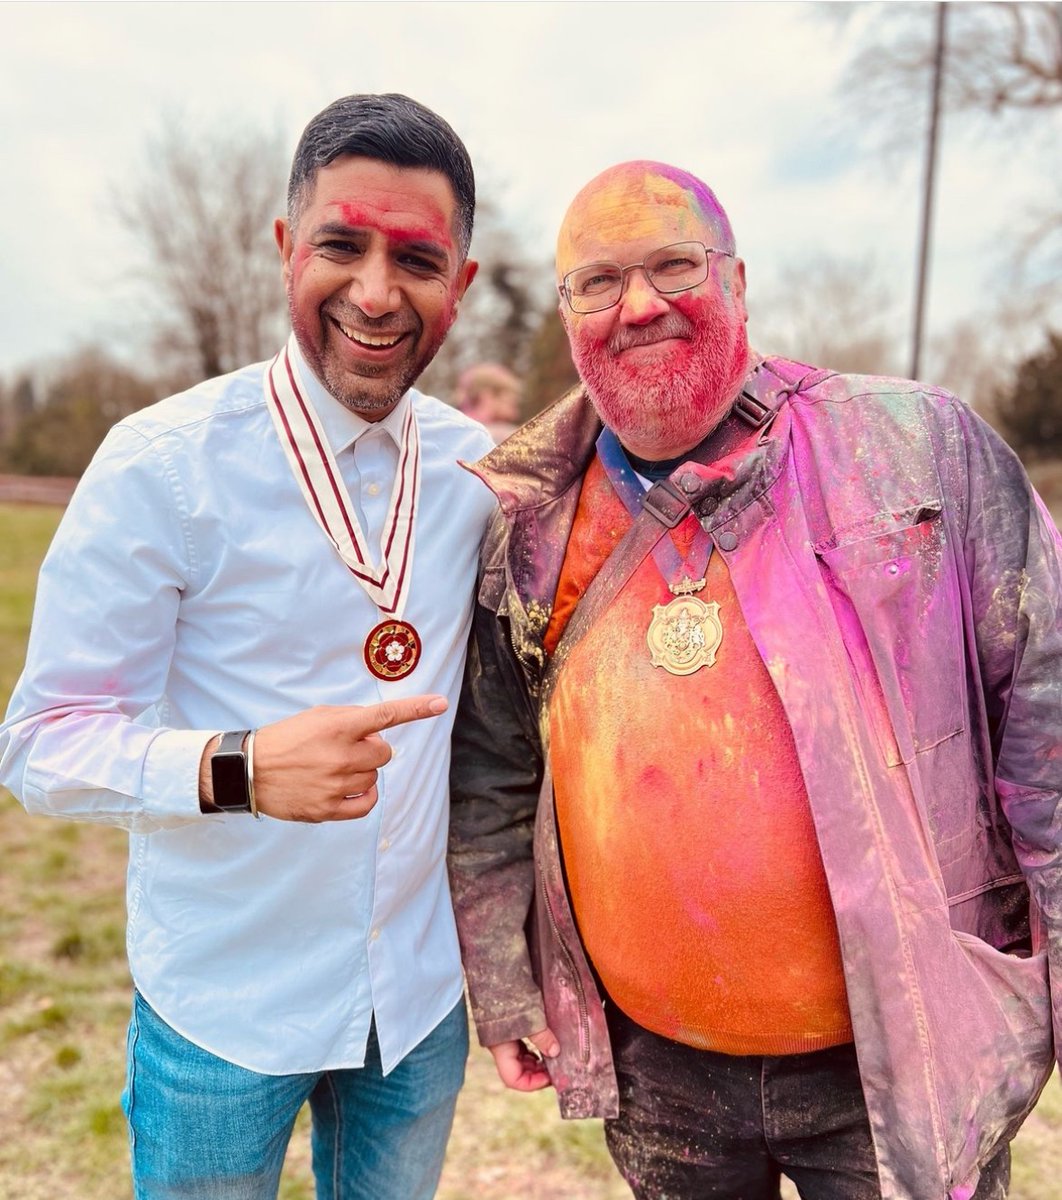 Wishing all those who celebrate it, a very Happy Holi! Deputy Lieutenants, Gurvinder Sandher and Andrew Wood attended events to celebrate #Holi #festivalofcolour over the weekend and had a great (and very colourful!) time. Thankyou to all involved. @cohesionplus